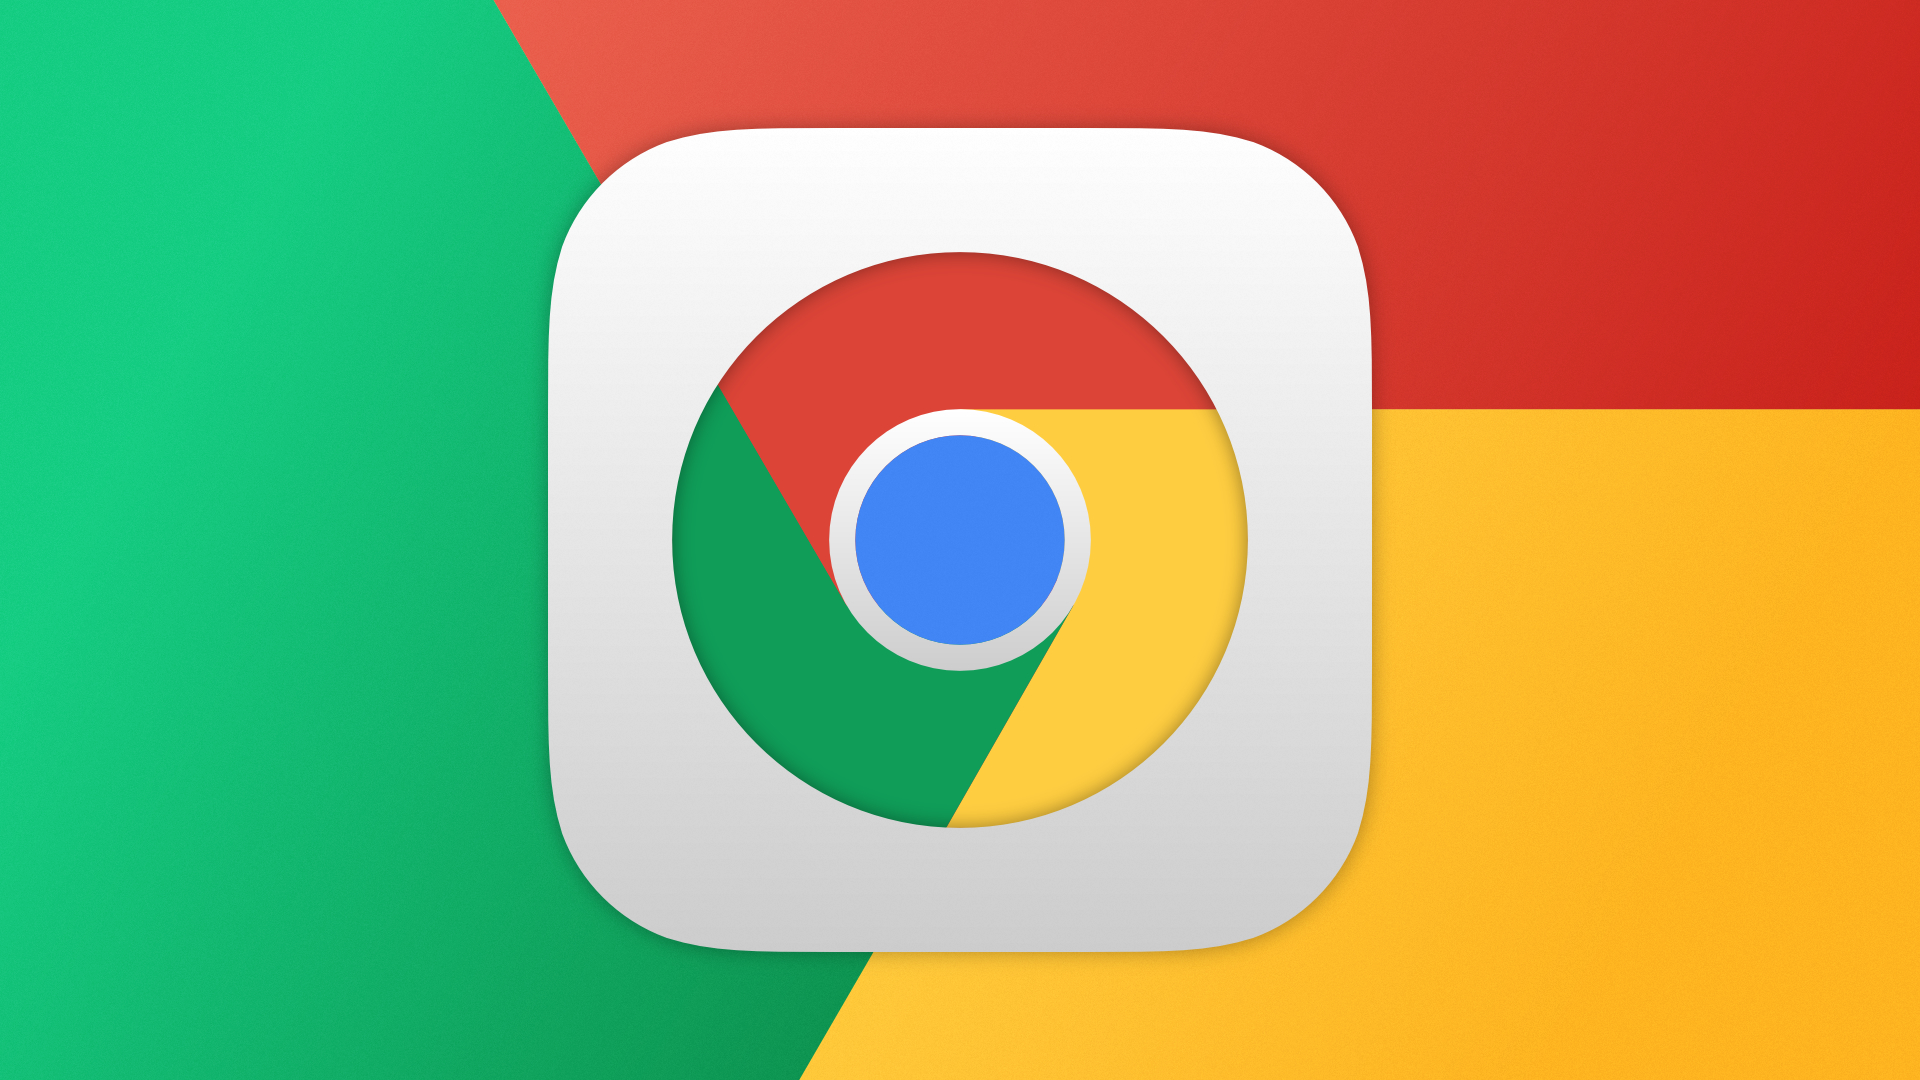 Chrome rolls out ‘Listen to this page’ TTS feature on Android